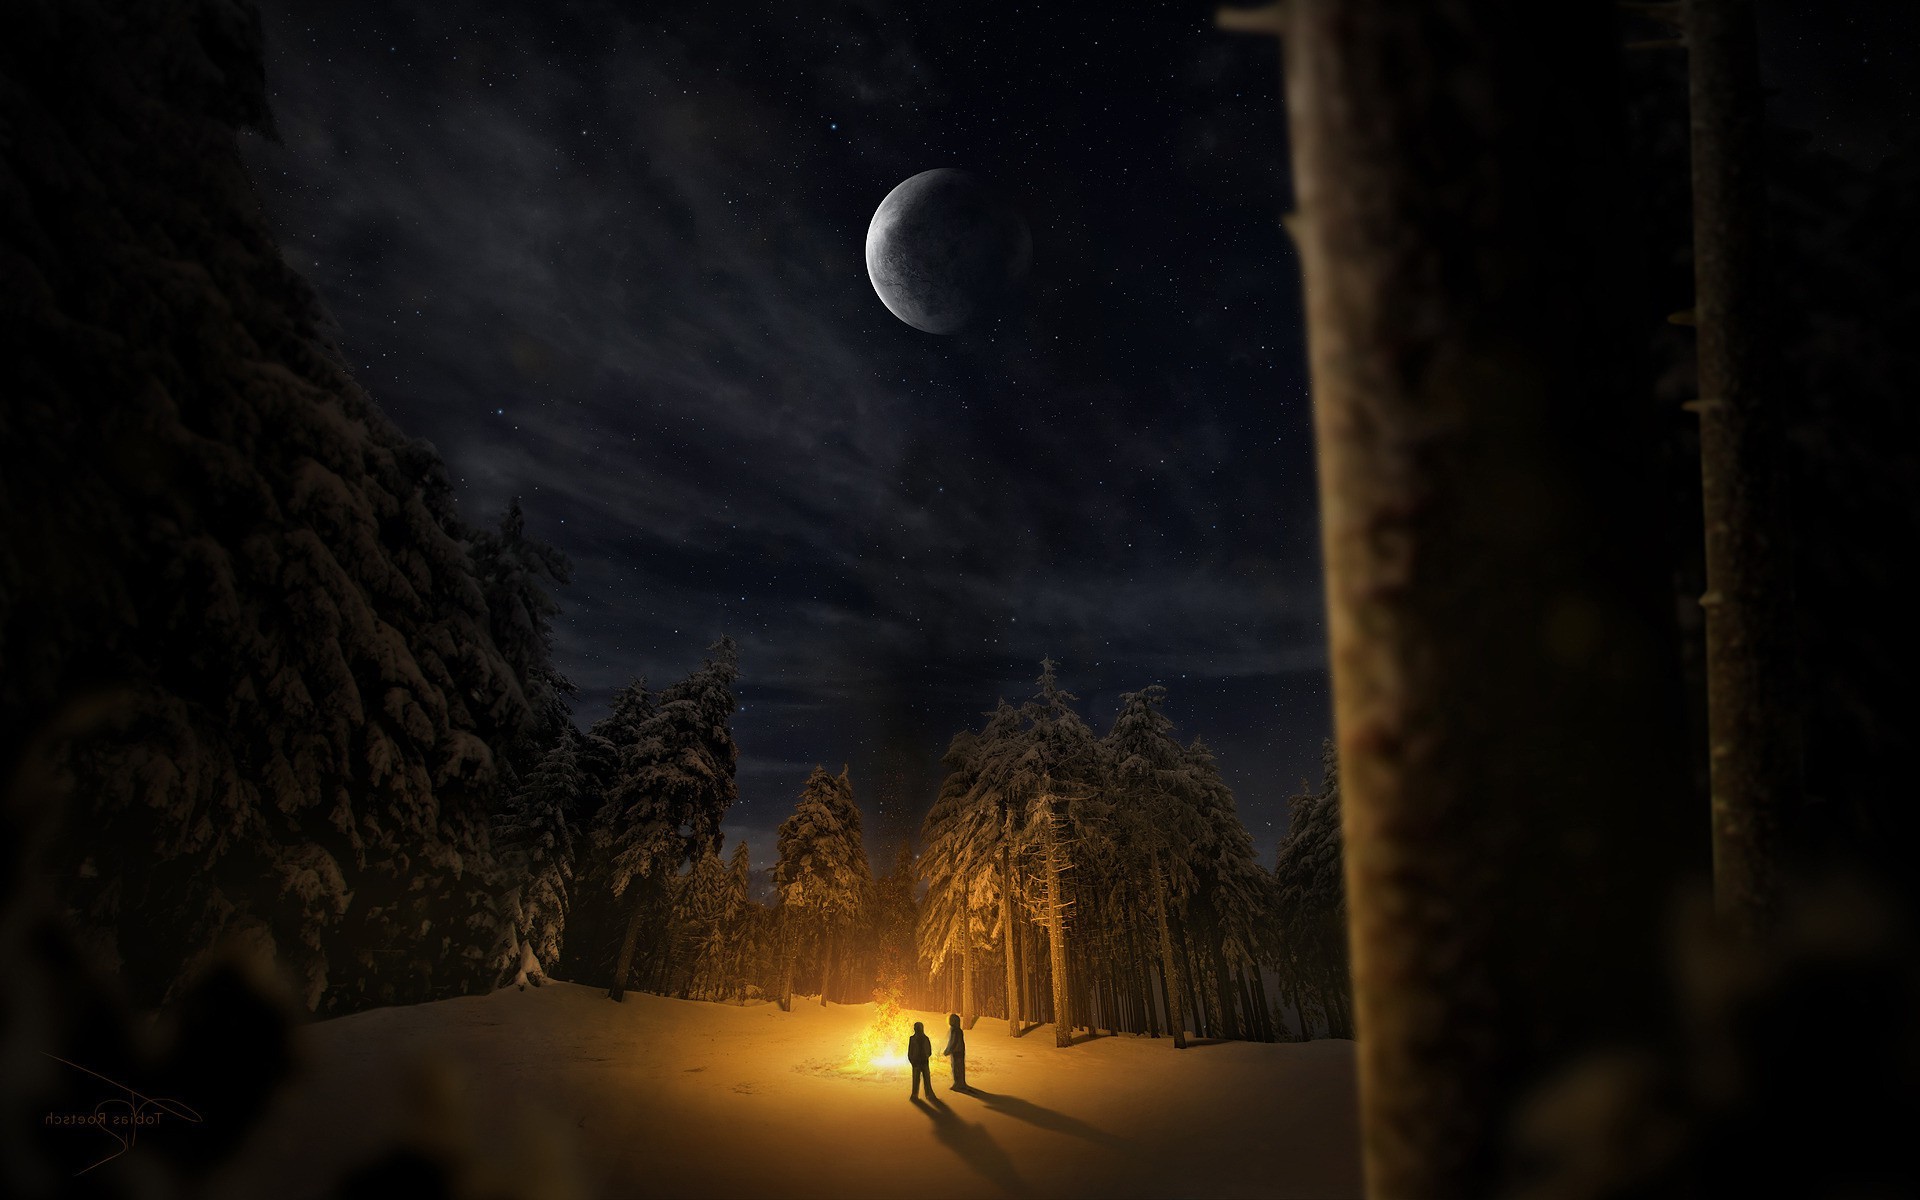 digital art fantasy art people painting artwork silhouette nature field trees night moon sky clouds winter snow fire campfire shadow stars forest smoke wallpaper